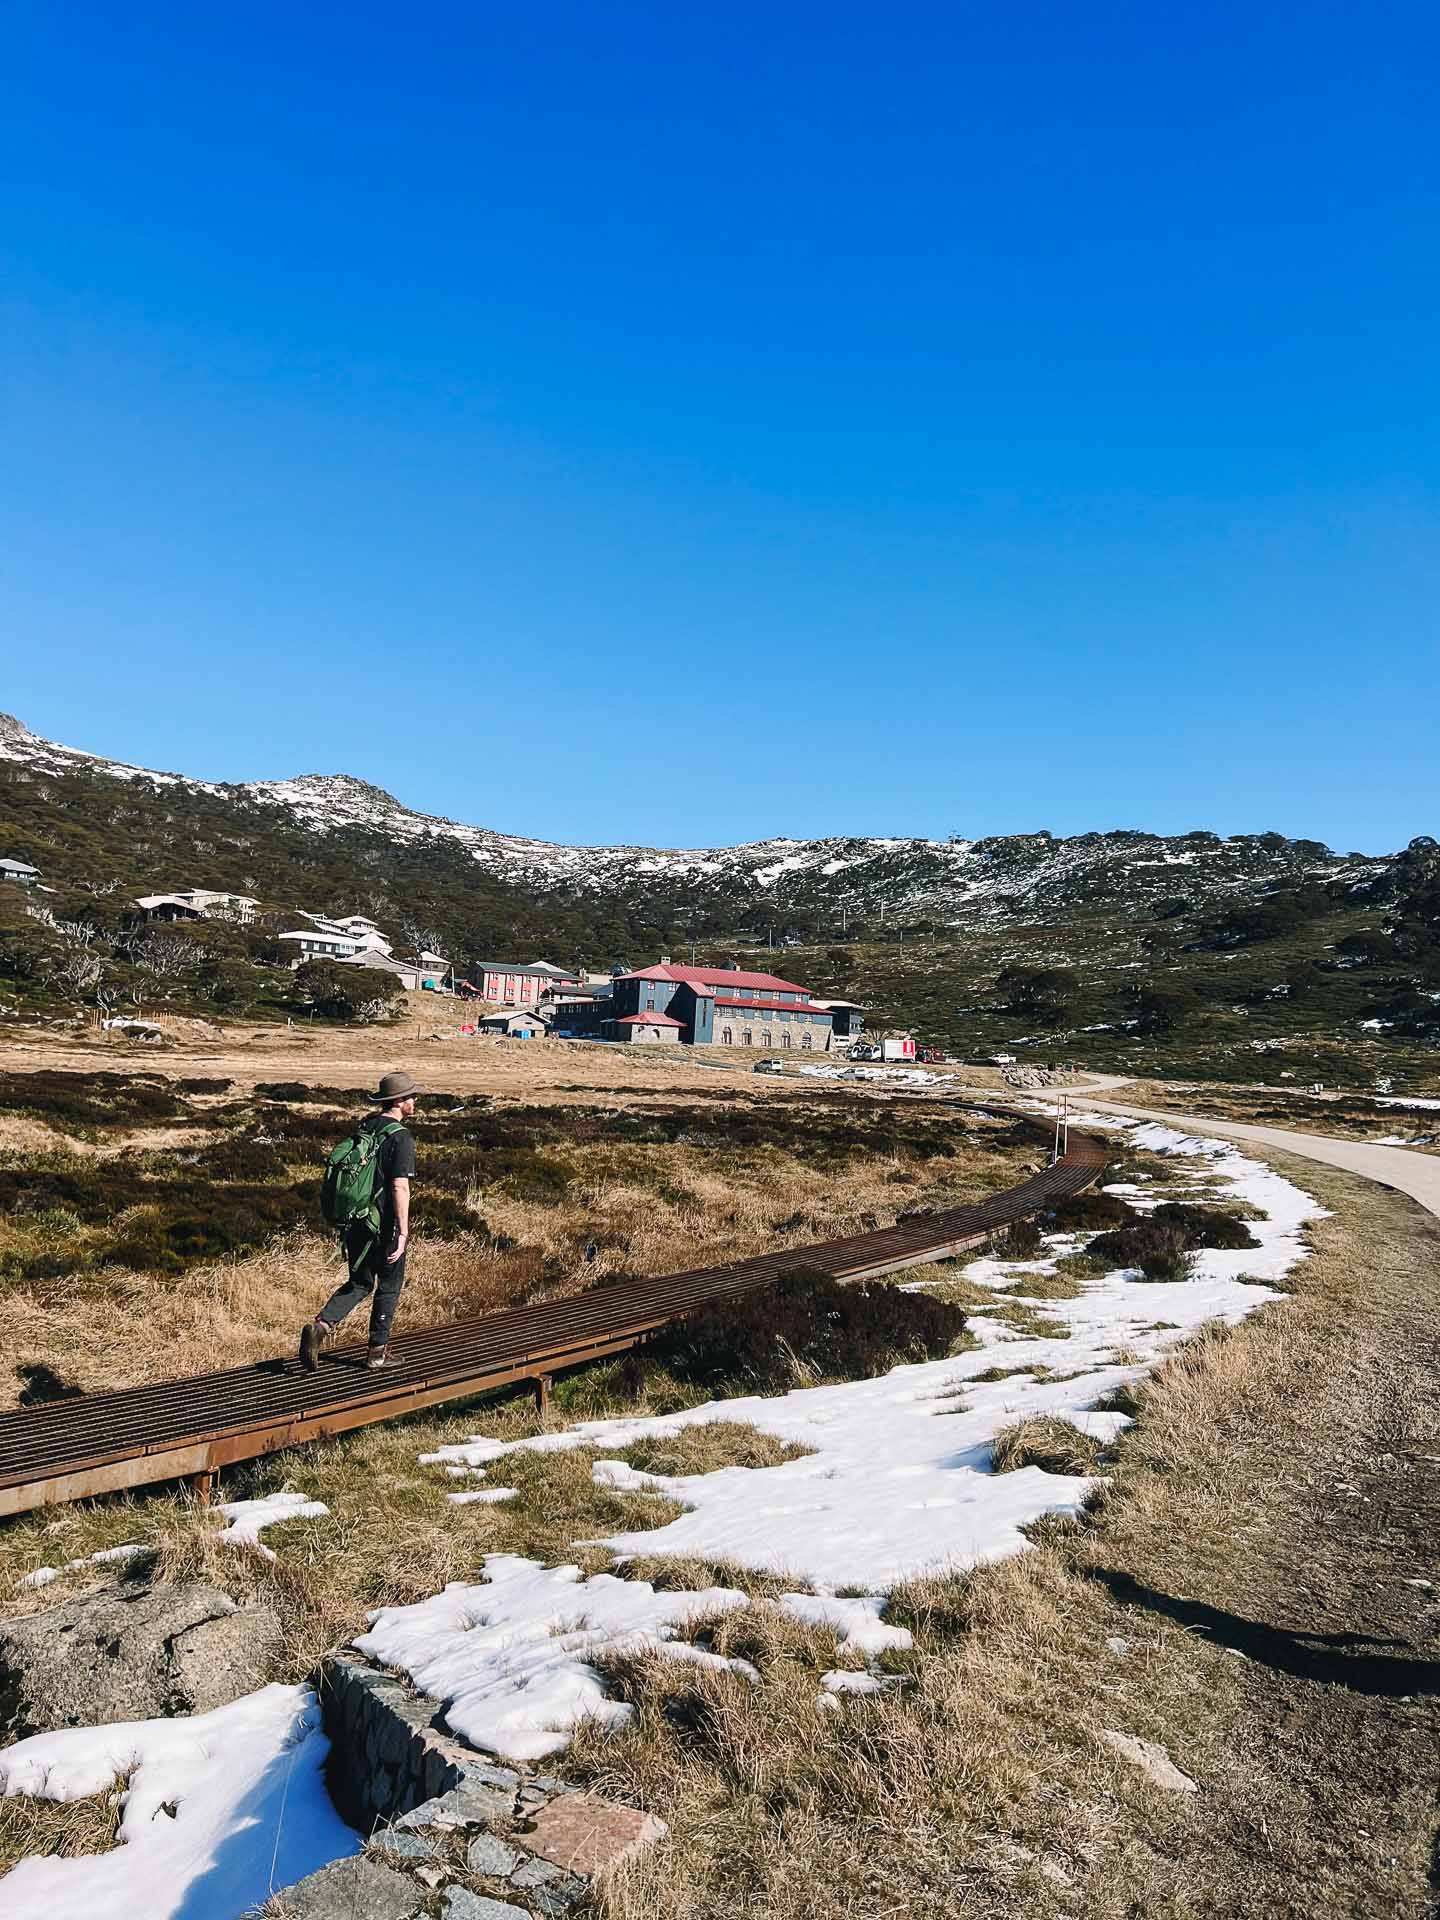 Charlotte Pass to Perisher Walk – Hiking the Newest Stage of the Snowies Alpine Walk in Kosciuszko National Park, nsw hikes, Photo by Kate Donald, alpine, back country, day hike, hiker on snowy trail at kosciuszko with accommodation in background